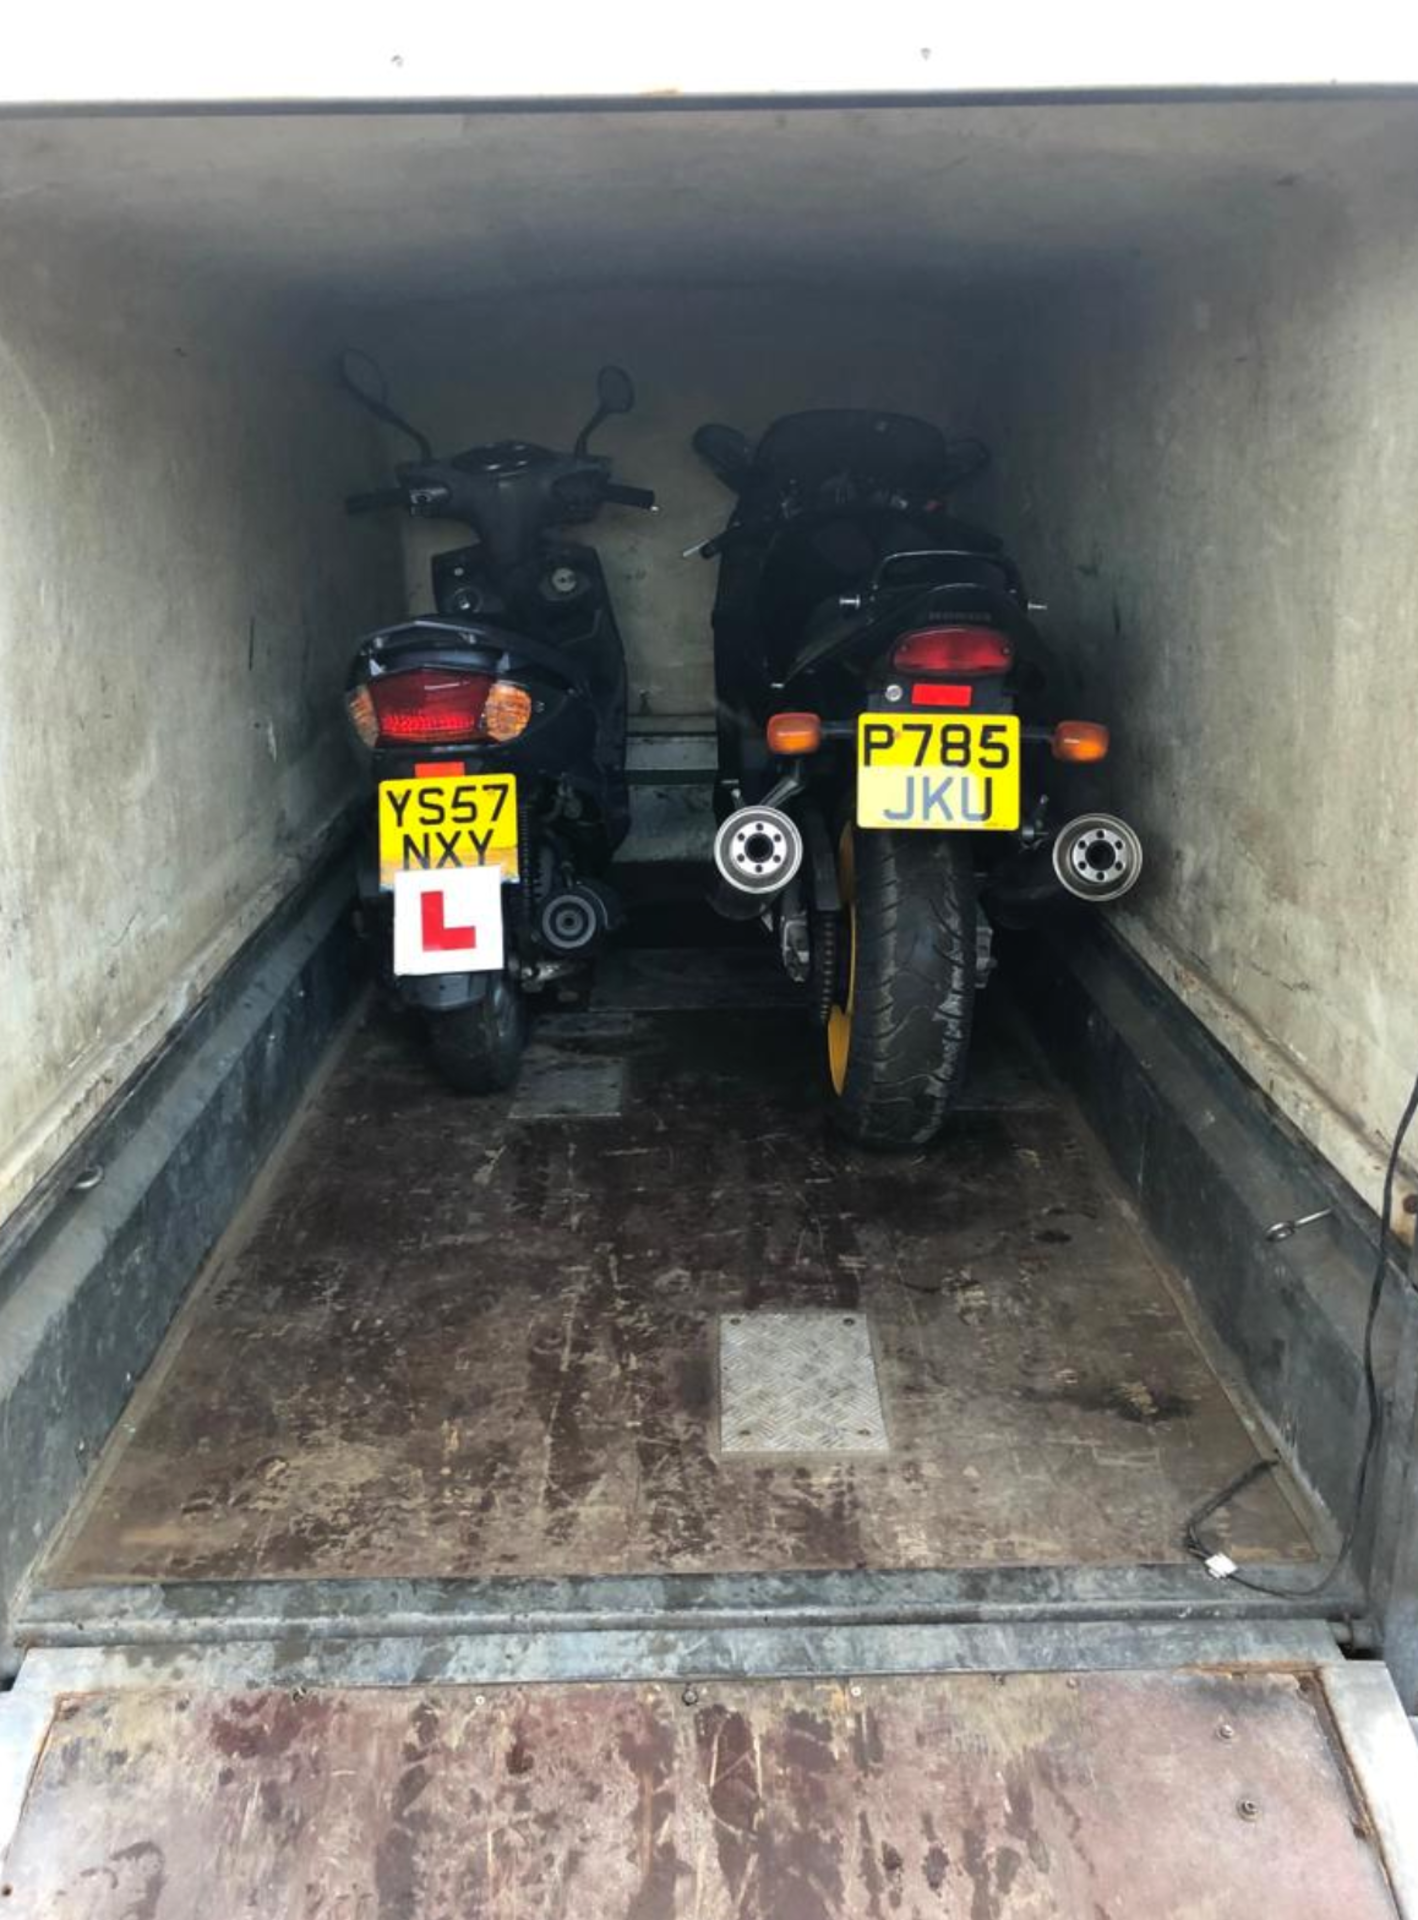 SPECIALIST SINGLE AXLE TOWABLE MOTORBIKE TRANSPORT COVERED TRAILER RAMP *PLUS VAT* - £1500 RESERVE! - Image 9 of 9